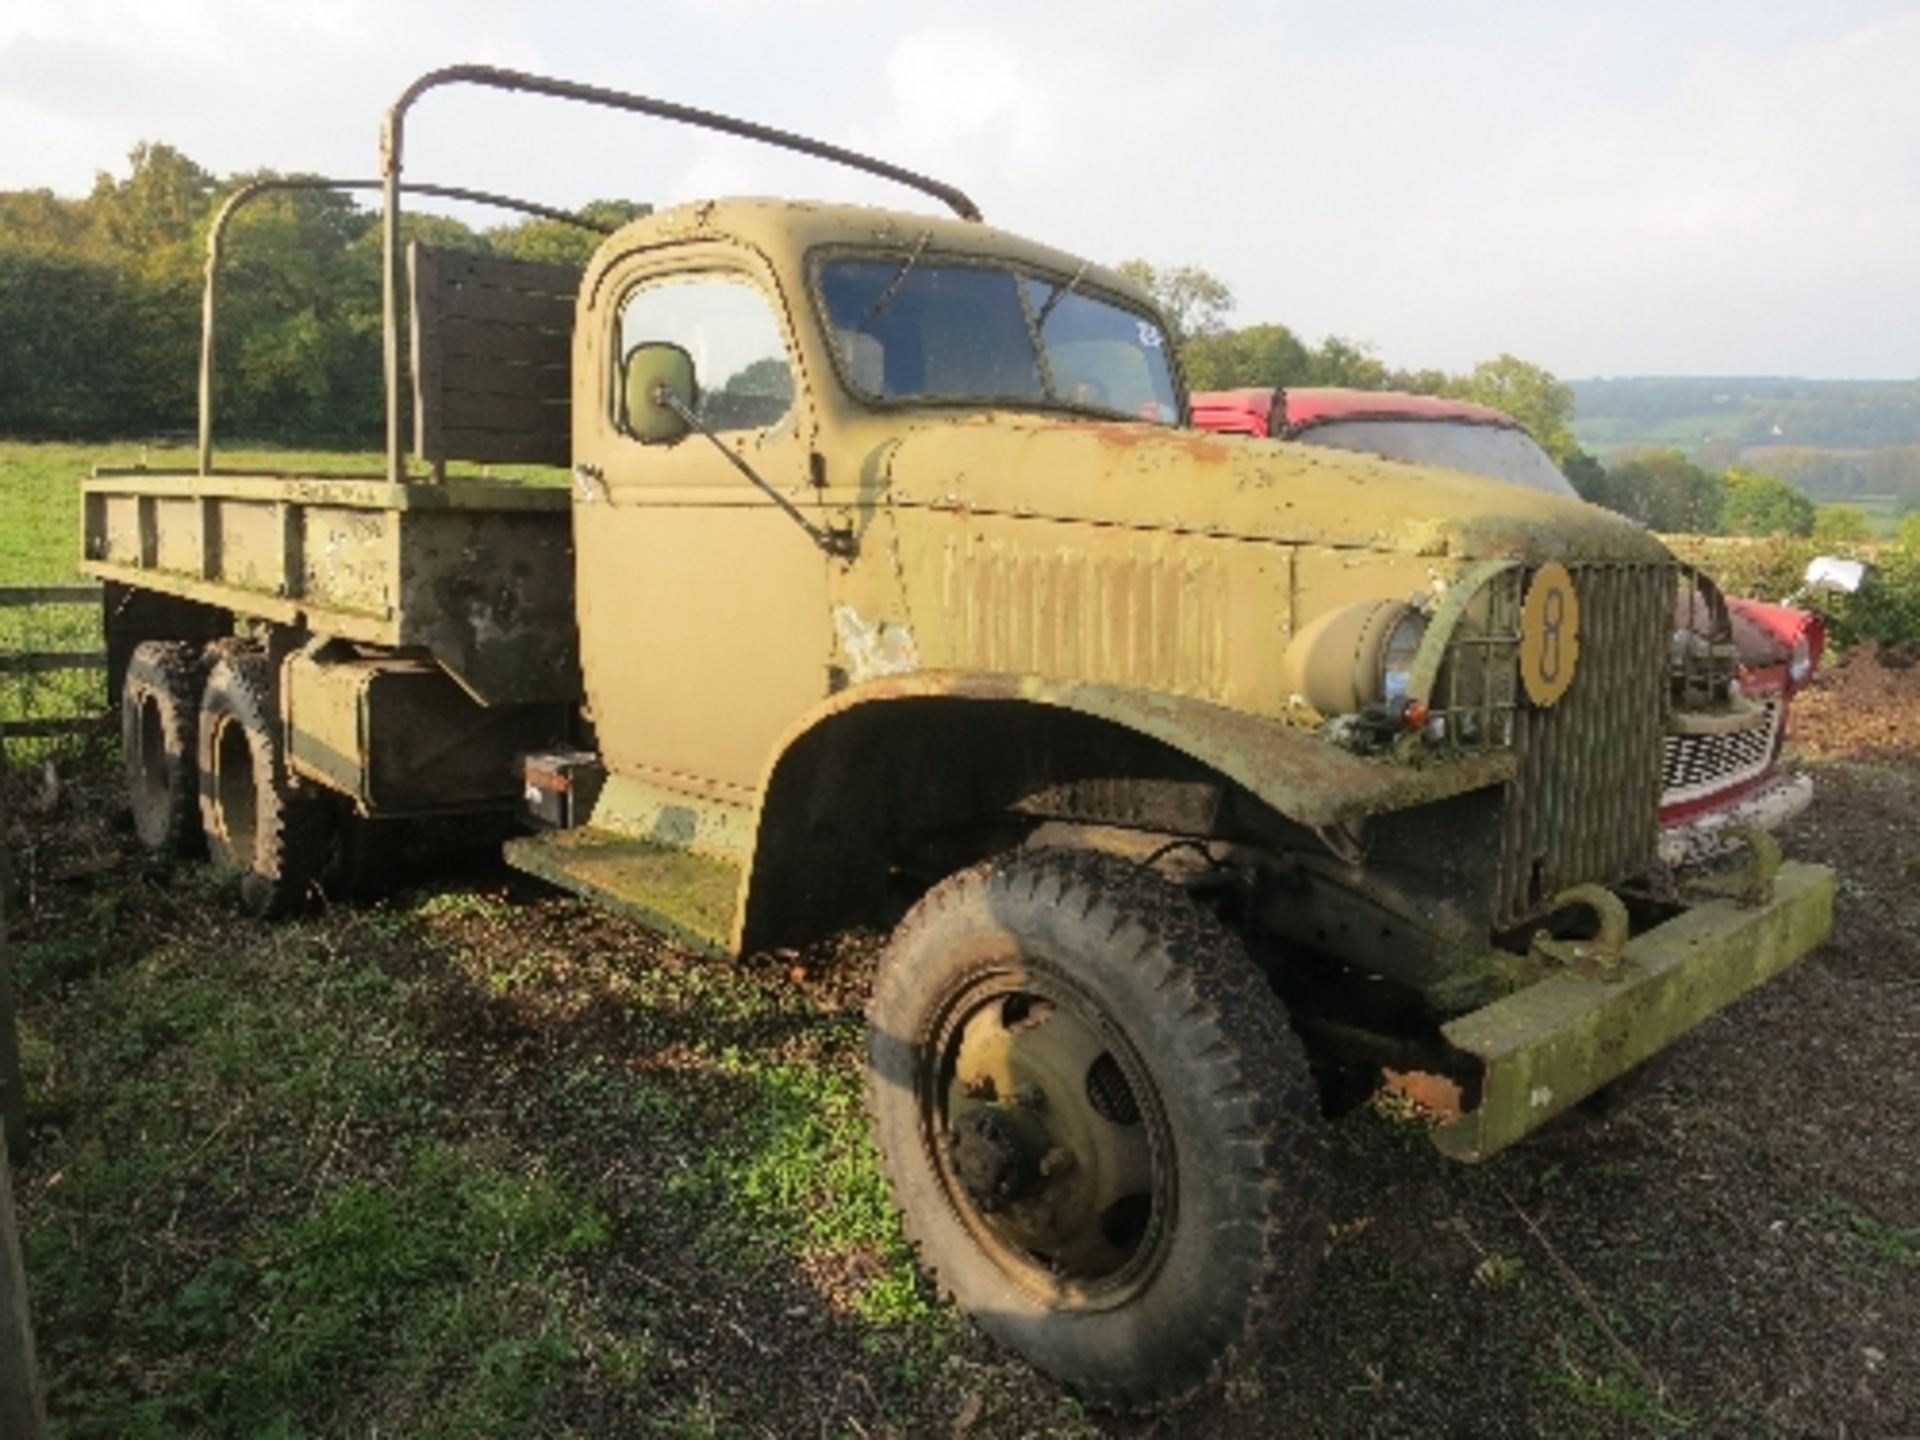 GMC CCKW 353 WOW 2.5 tonne 3x6 cargo US Army truck (left hand drive) - plate dated 30.4.1964 - USA